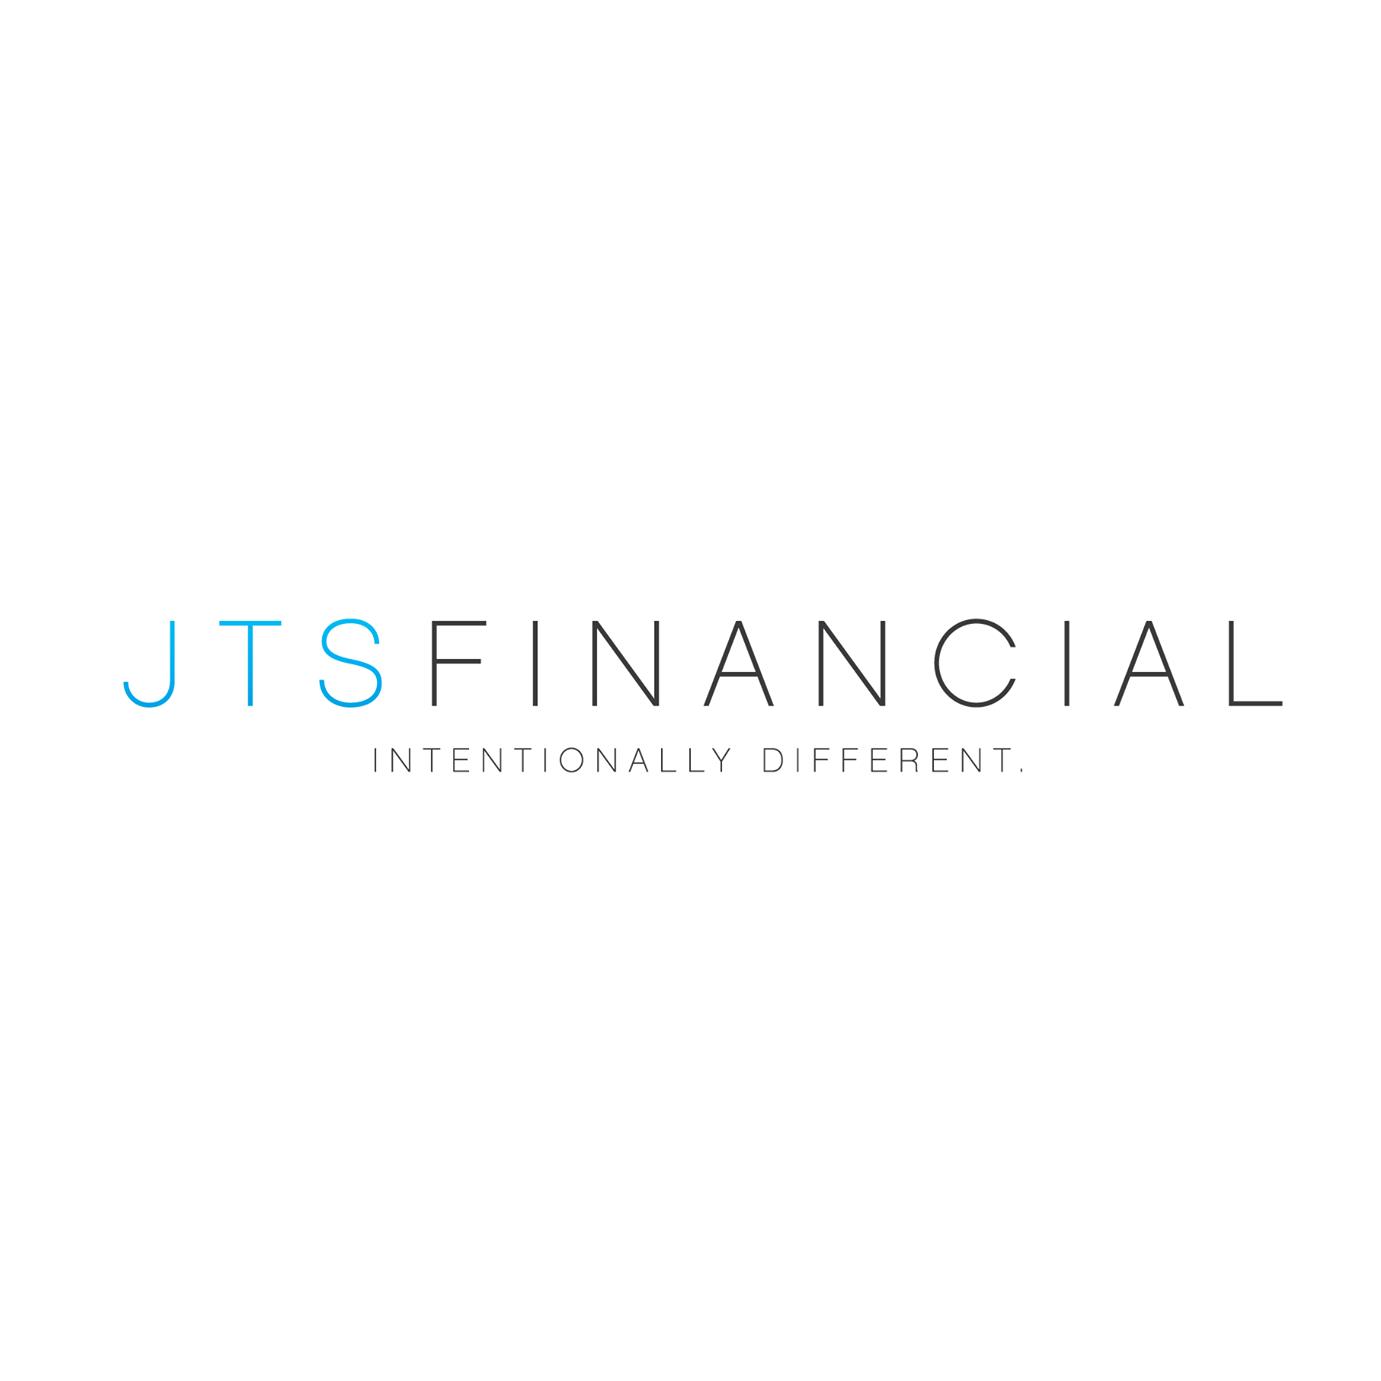 JTS Financial Services